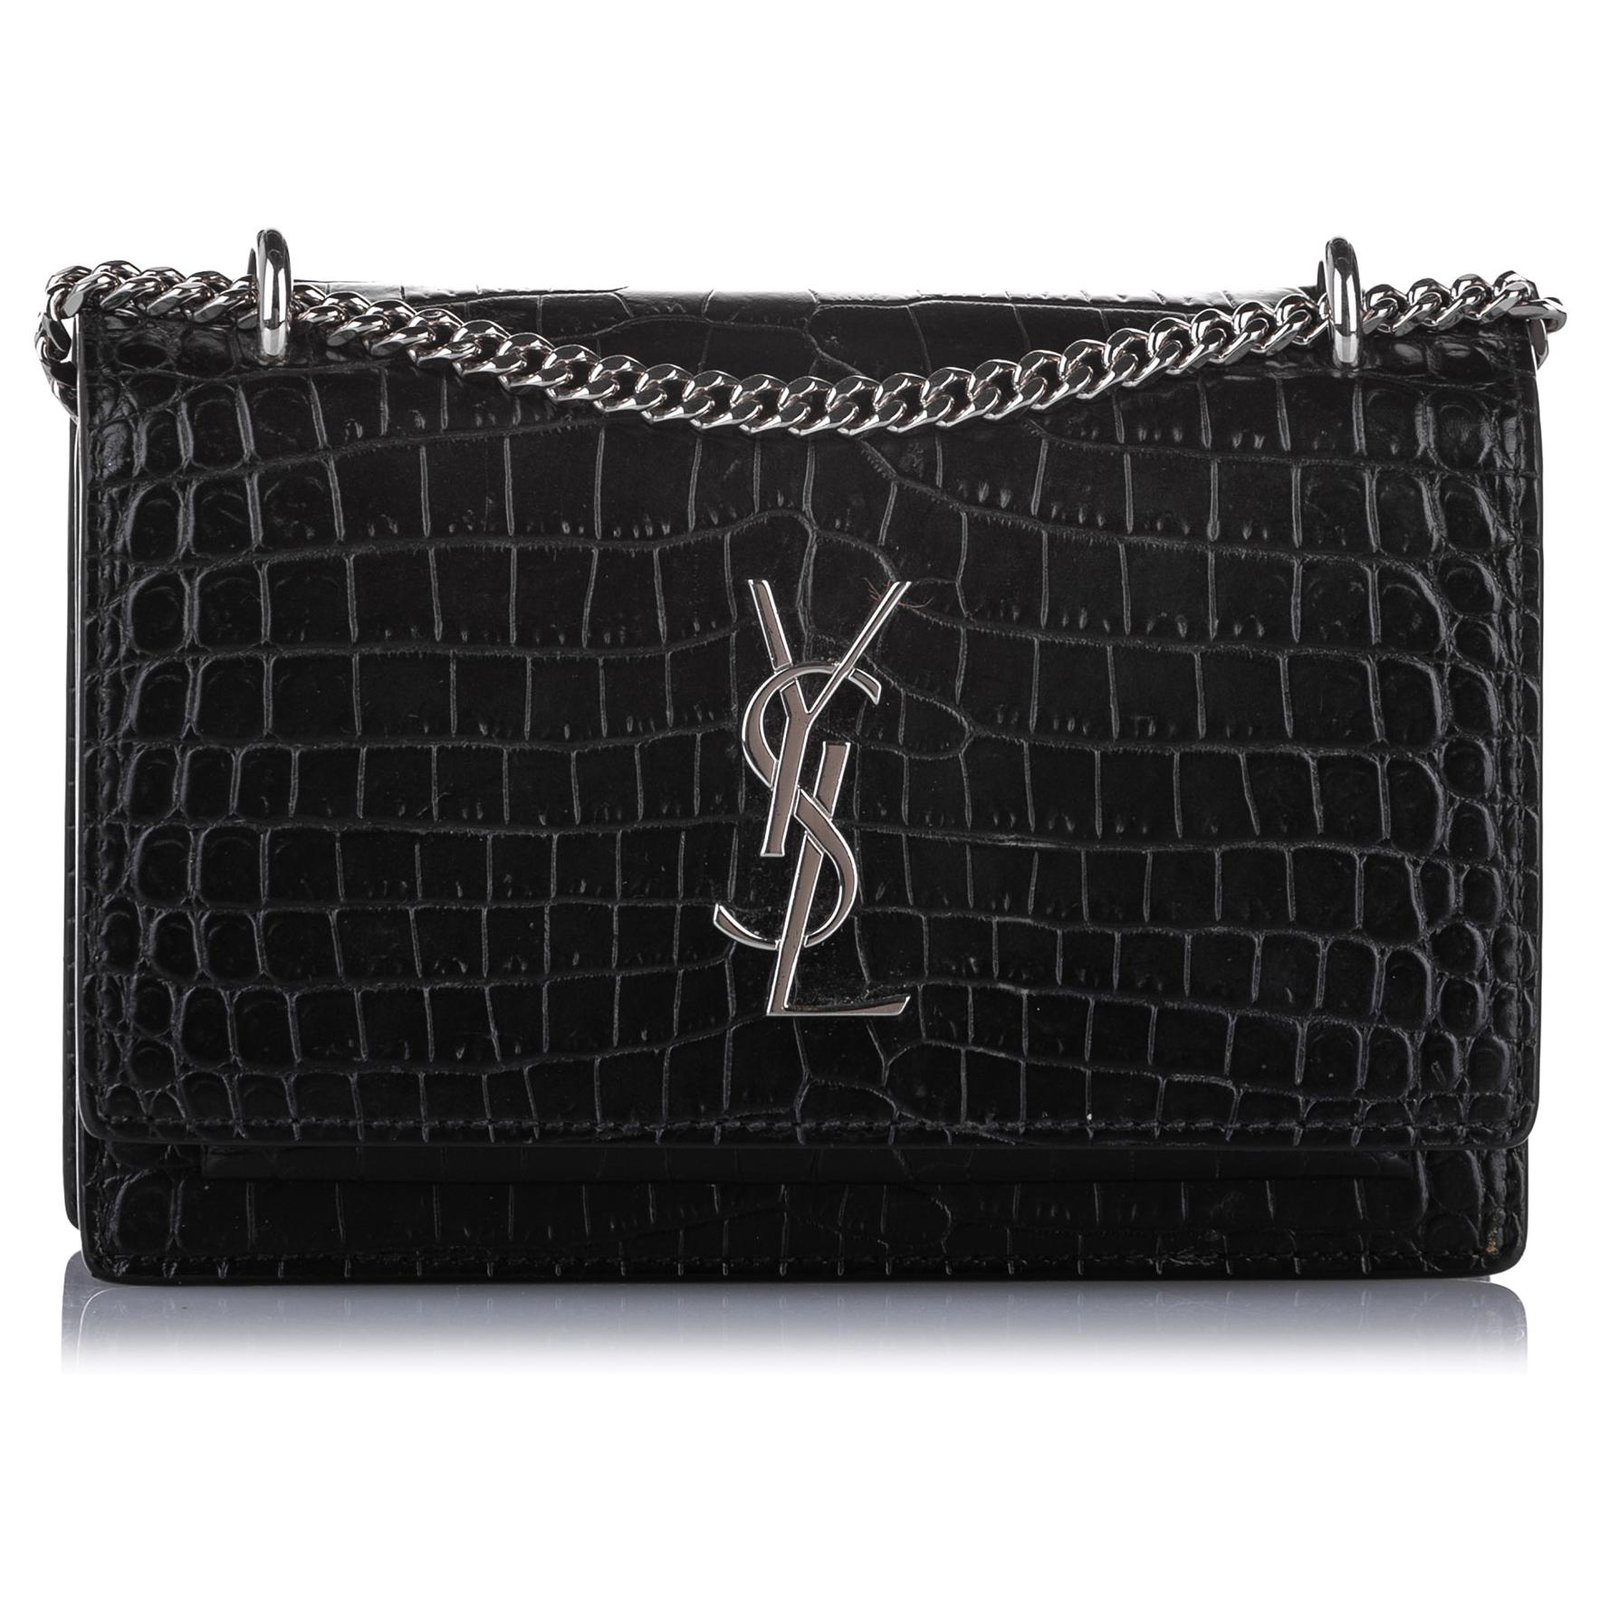 SUNSET Chain Wallet in crocodile-embossed shiny leather, Saint Laurent